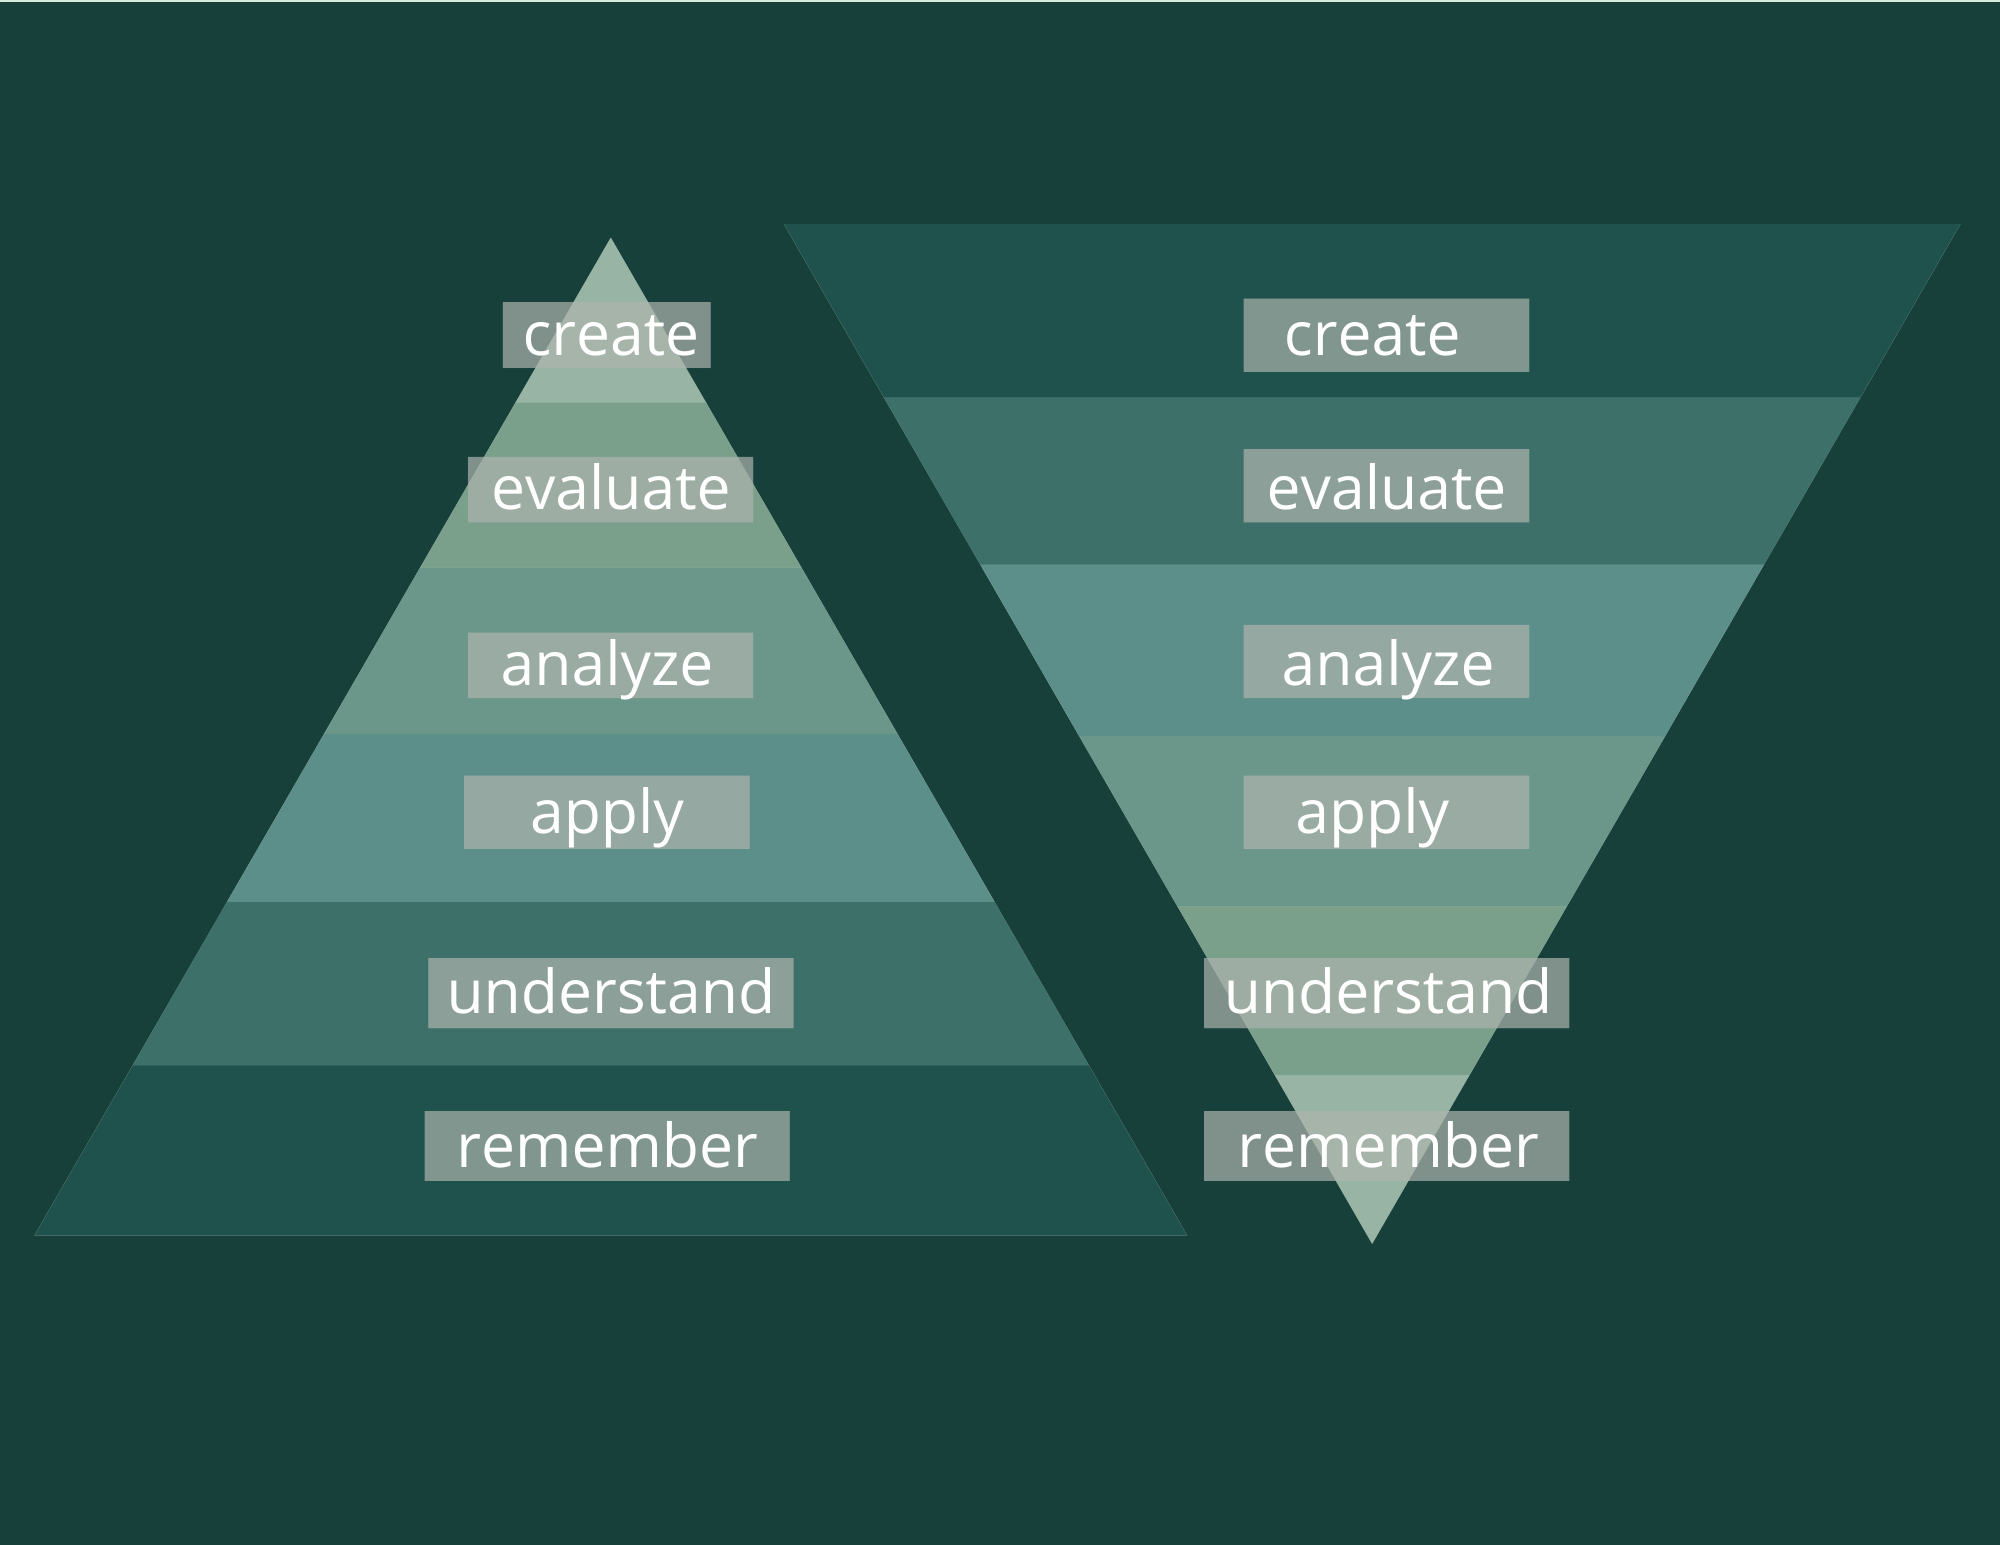 Diagram of Bloom's Taxonomy with two triangles with 6 tiers each. Triangle 1 from largest bottom tier to smallest top tier: remember, understand, apply, analyze, evaluate, create. In triangle 2, the triangle is flipped upside down. The "create" tier is now the largest tier.